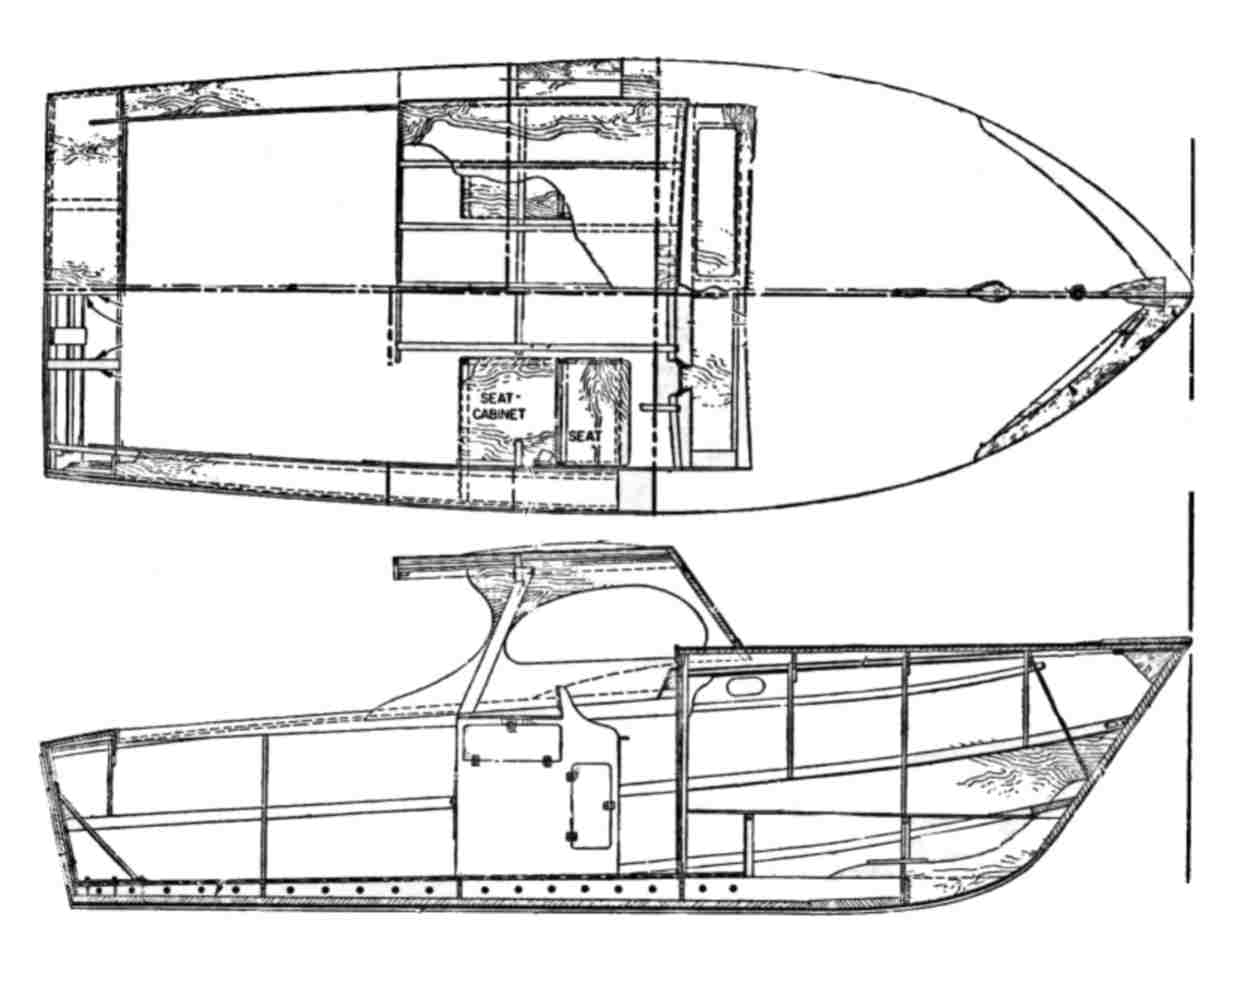 PLYWOOD RUNABOUTS, TWO 20 FOOTERS - Plans for U